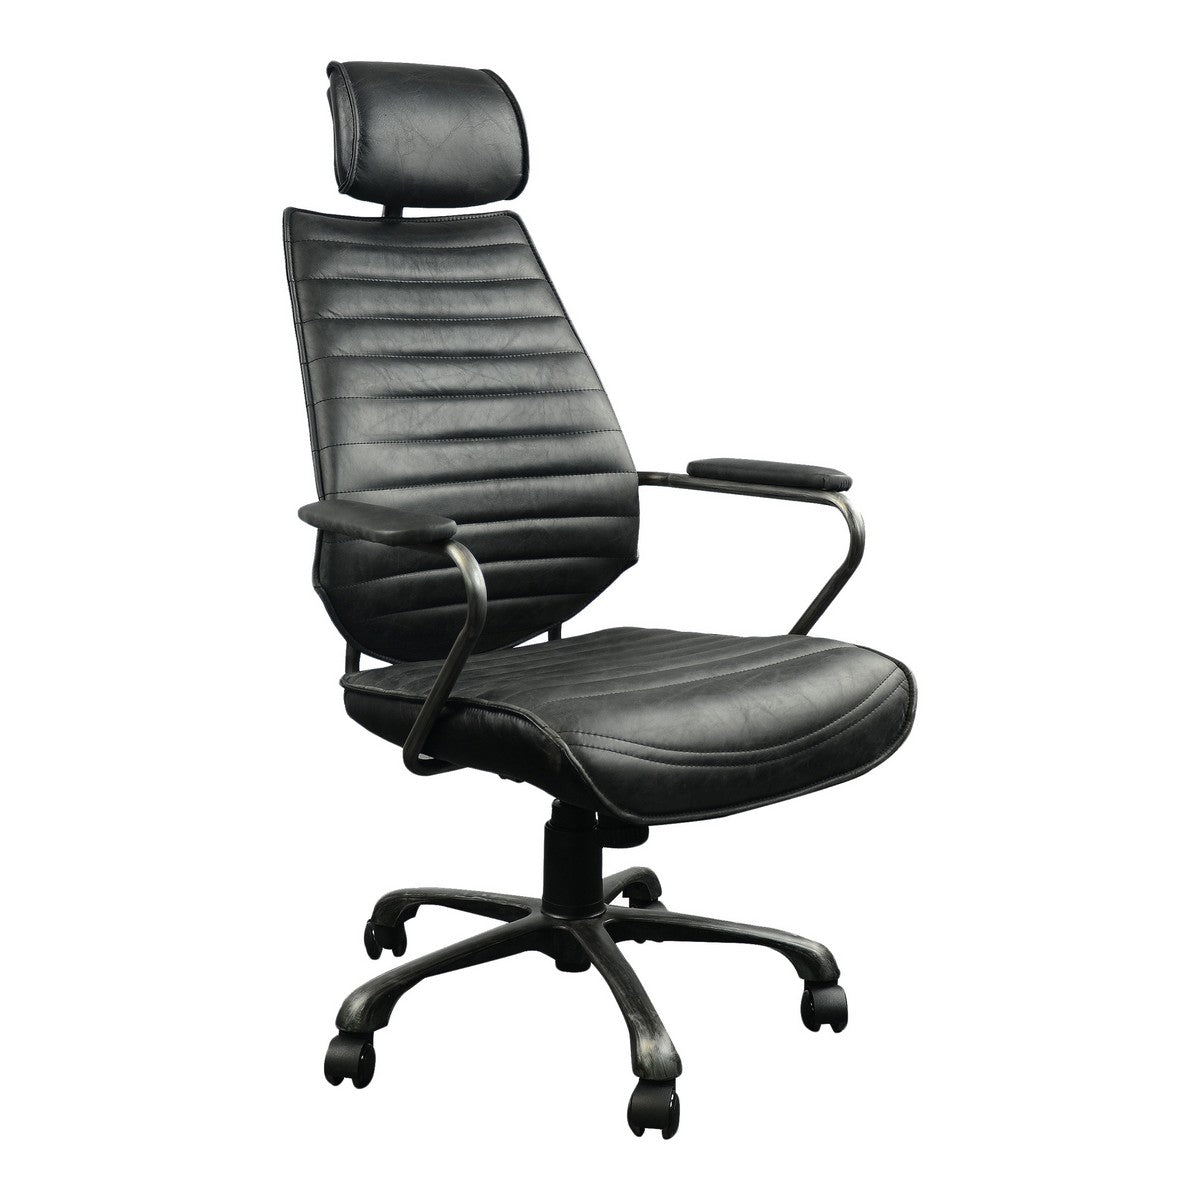 Moe's Home Collection Executive Swivel office Chair Black - PK-1081-02